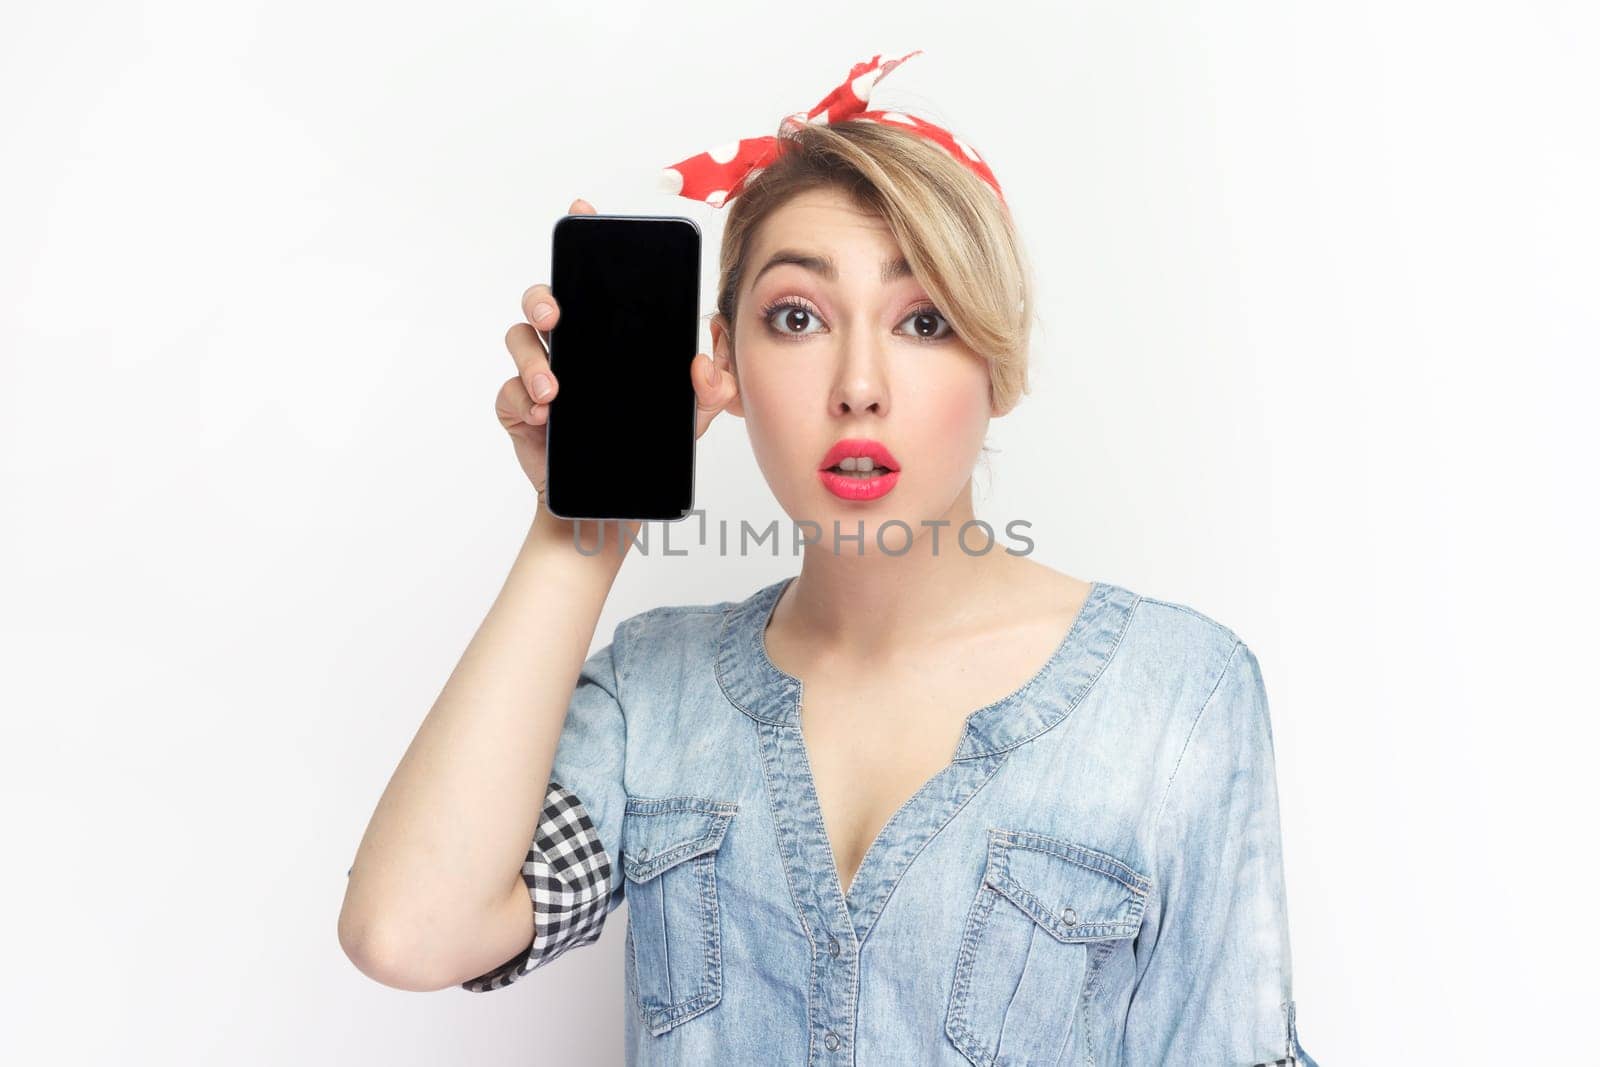 Portrait of shocked blonde young woman wearing blue denim shirt and red headband standing holding smart phone with black blank screen. Indoor studio shot isolated on gray background.